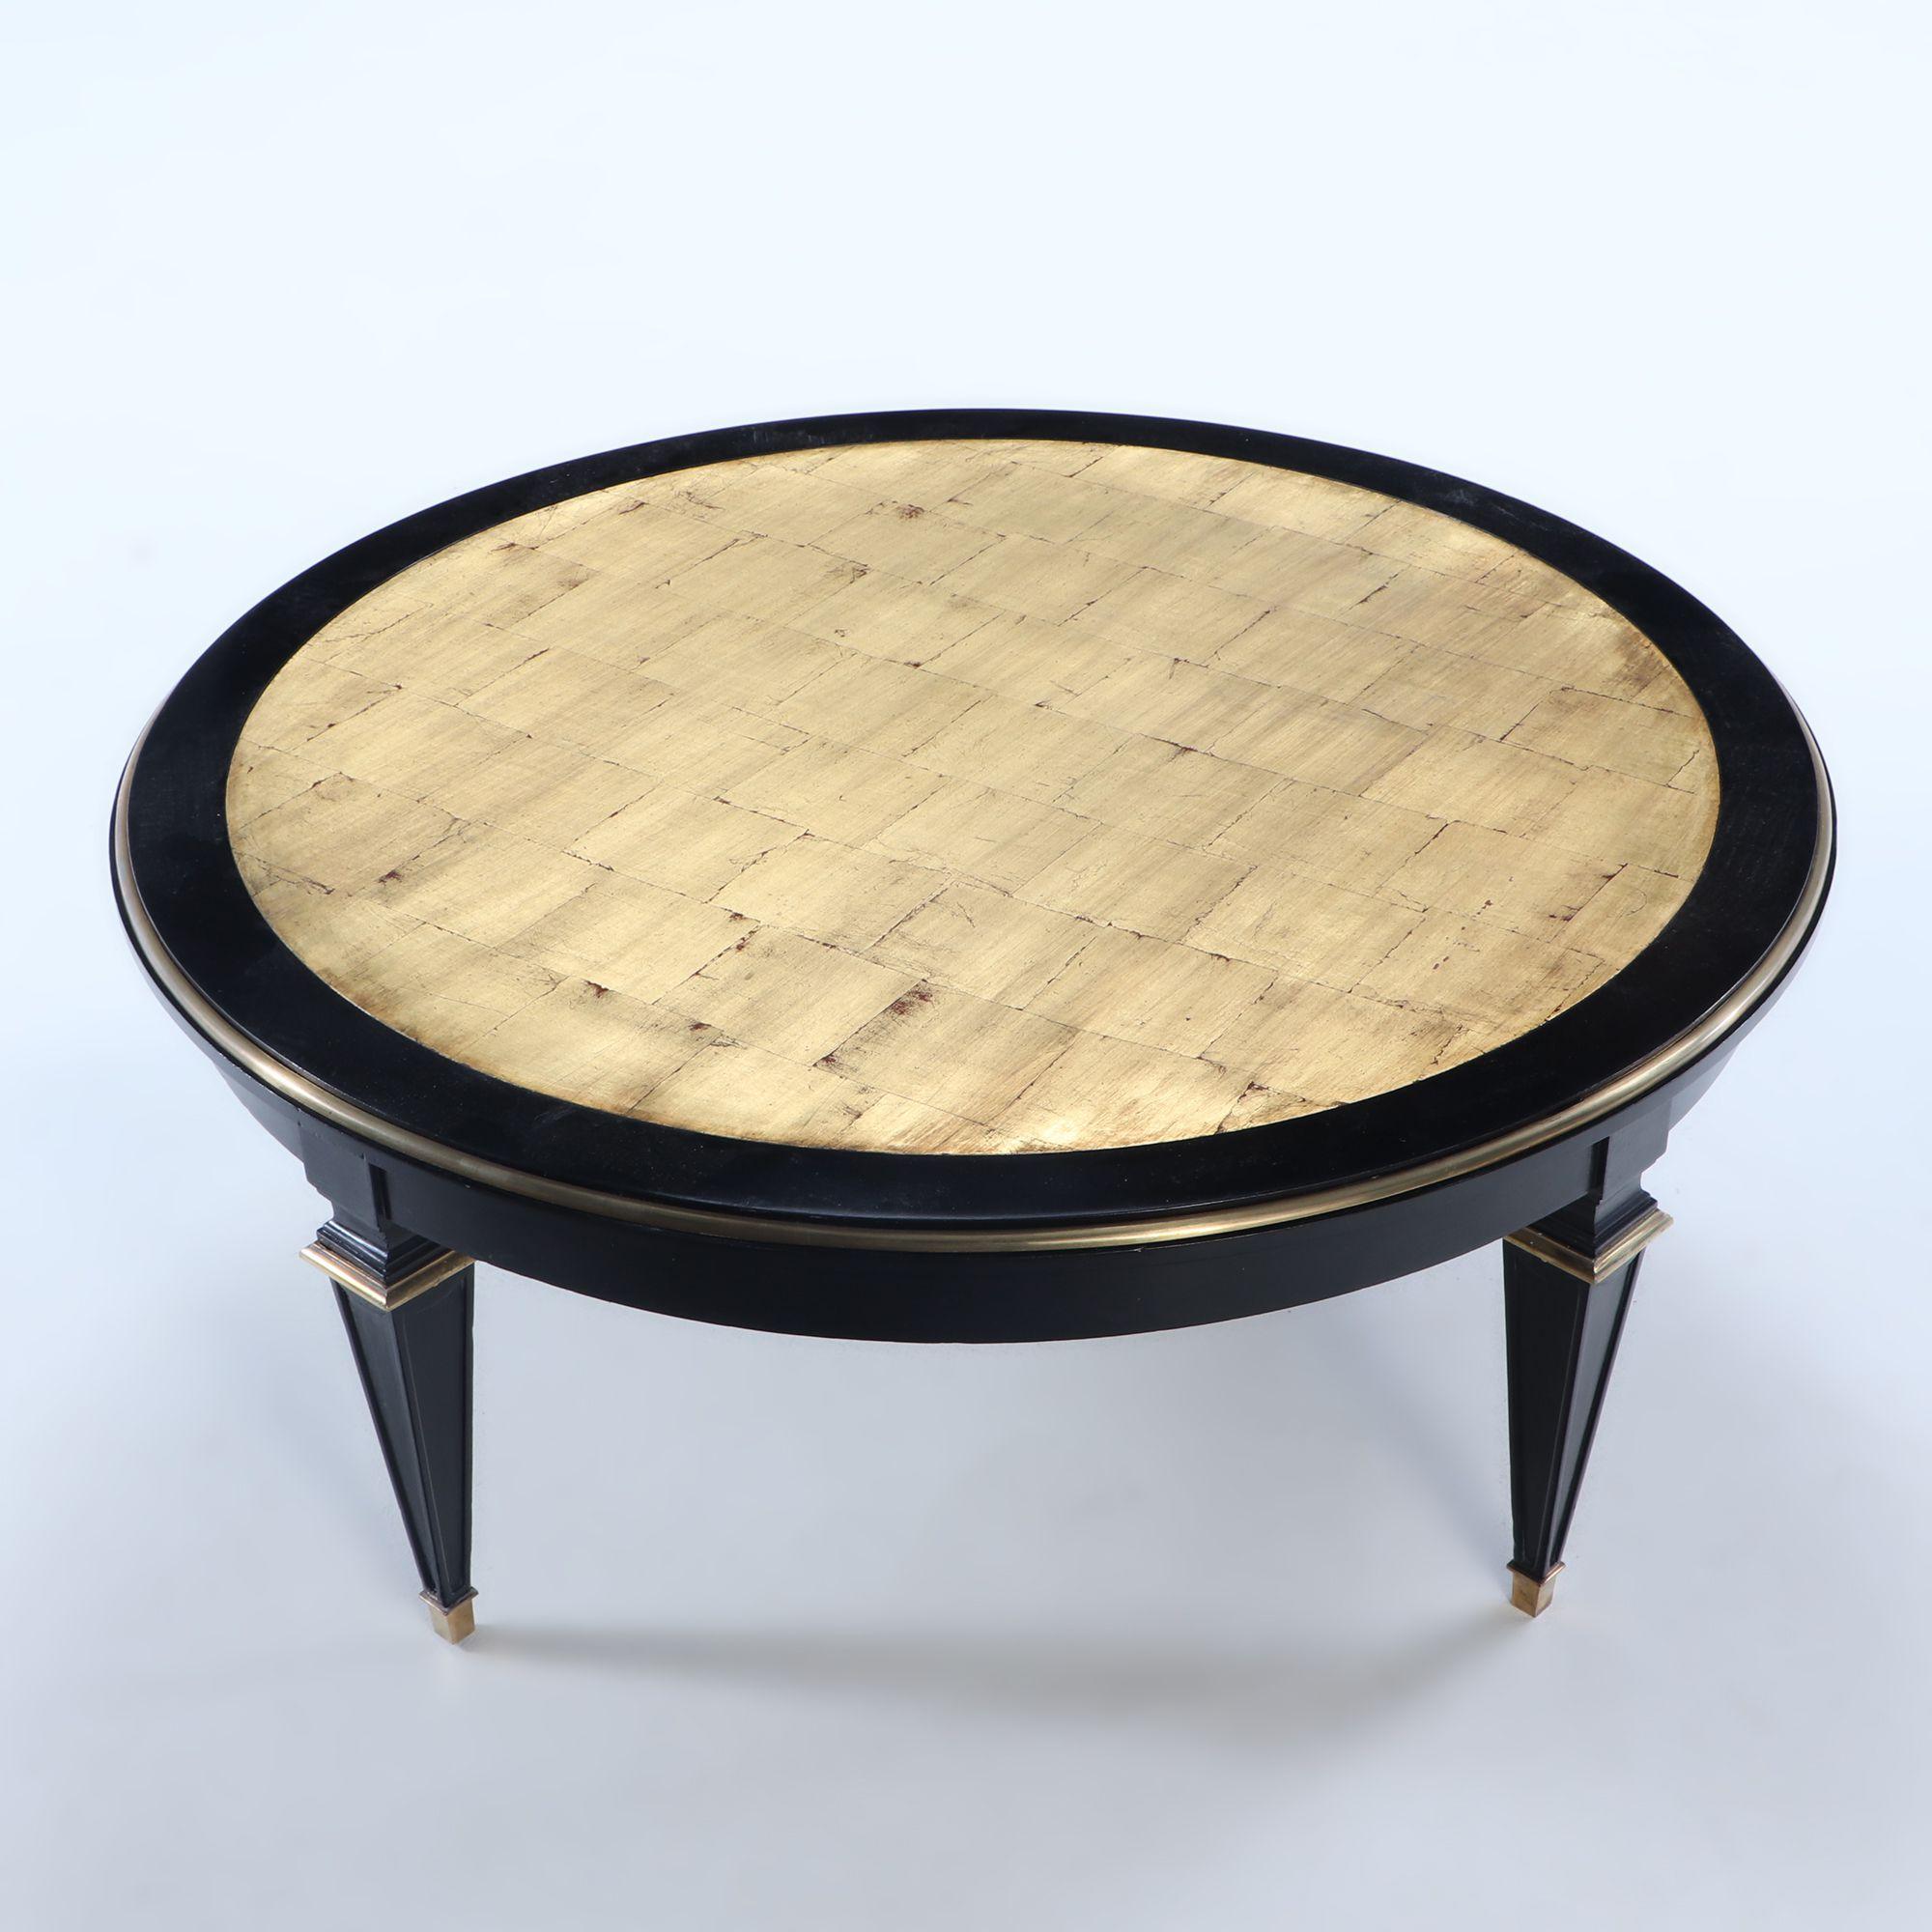 An ebonized round coffee table in the manner of Jansen having a gold gilt wood top trimmed in bronze and bronze mounted legs, circa 1940.